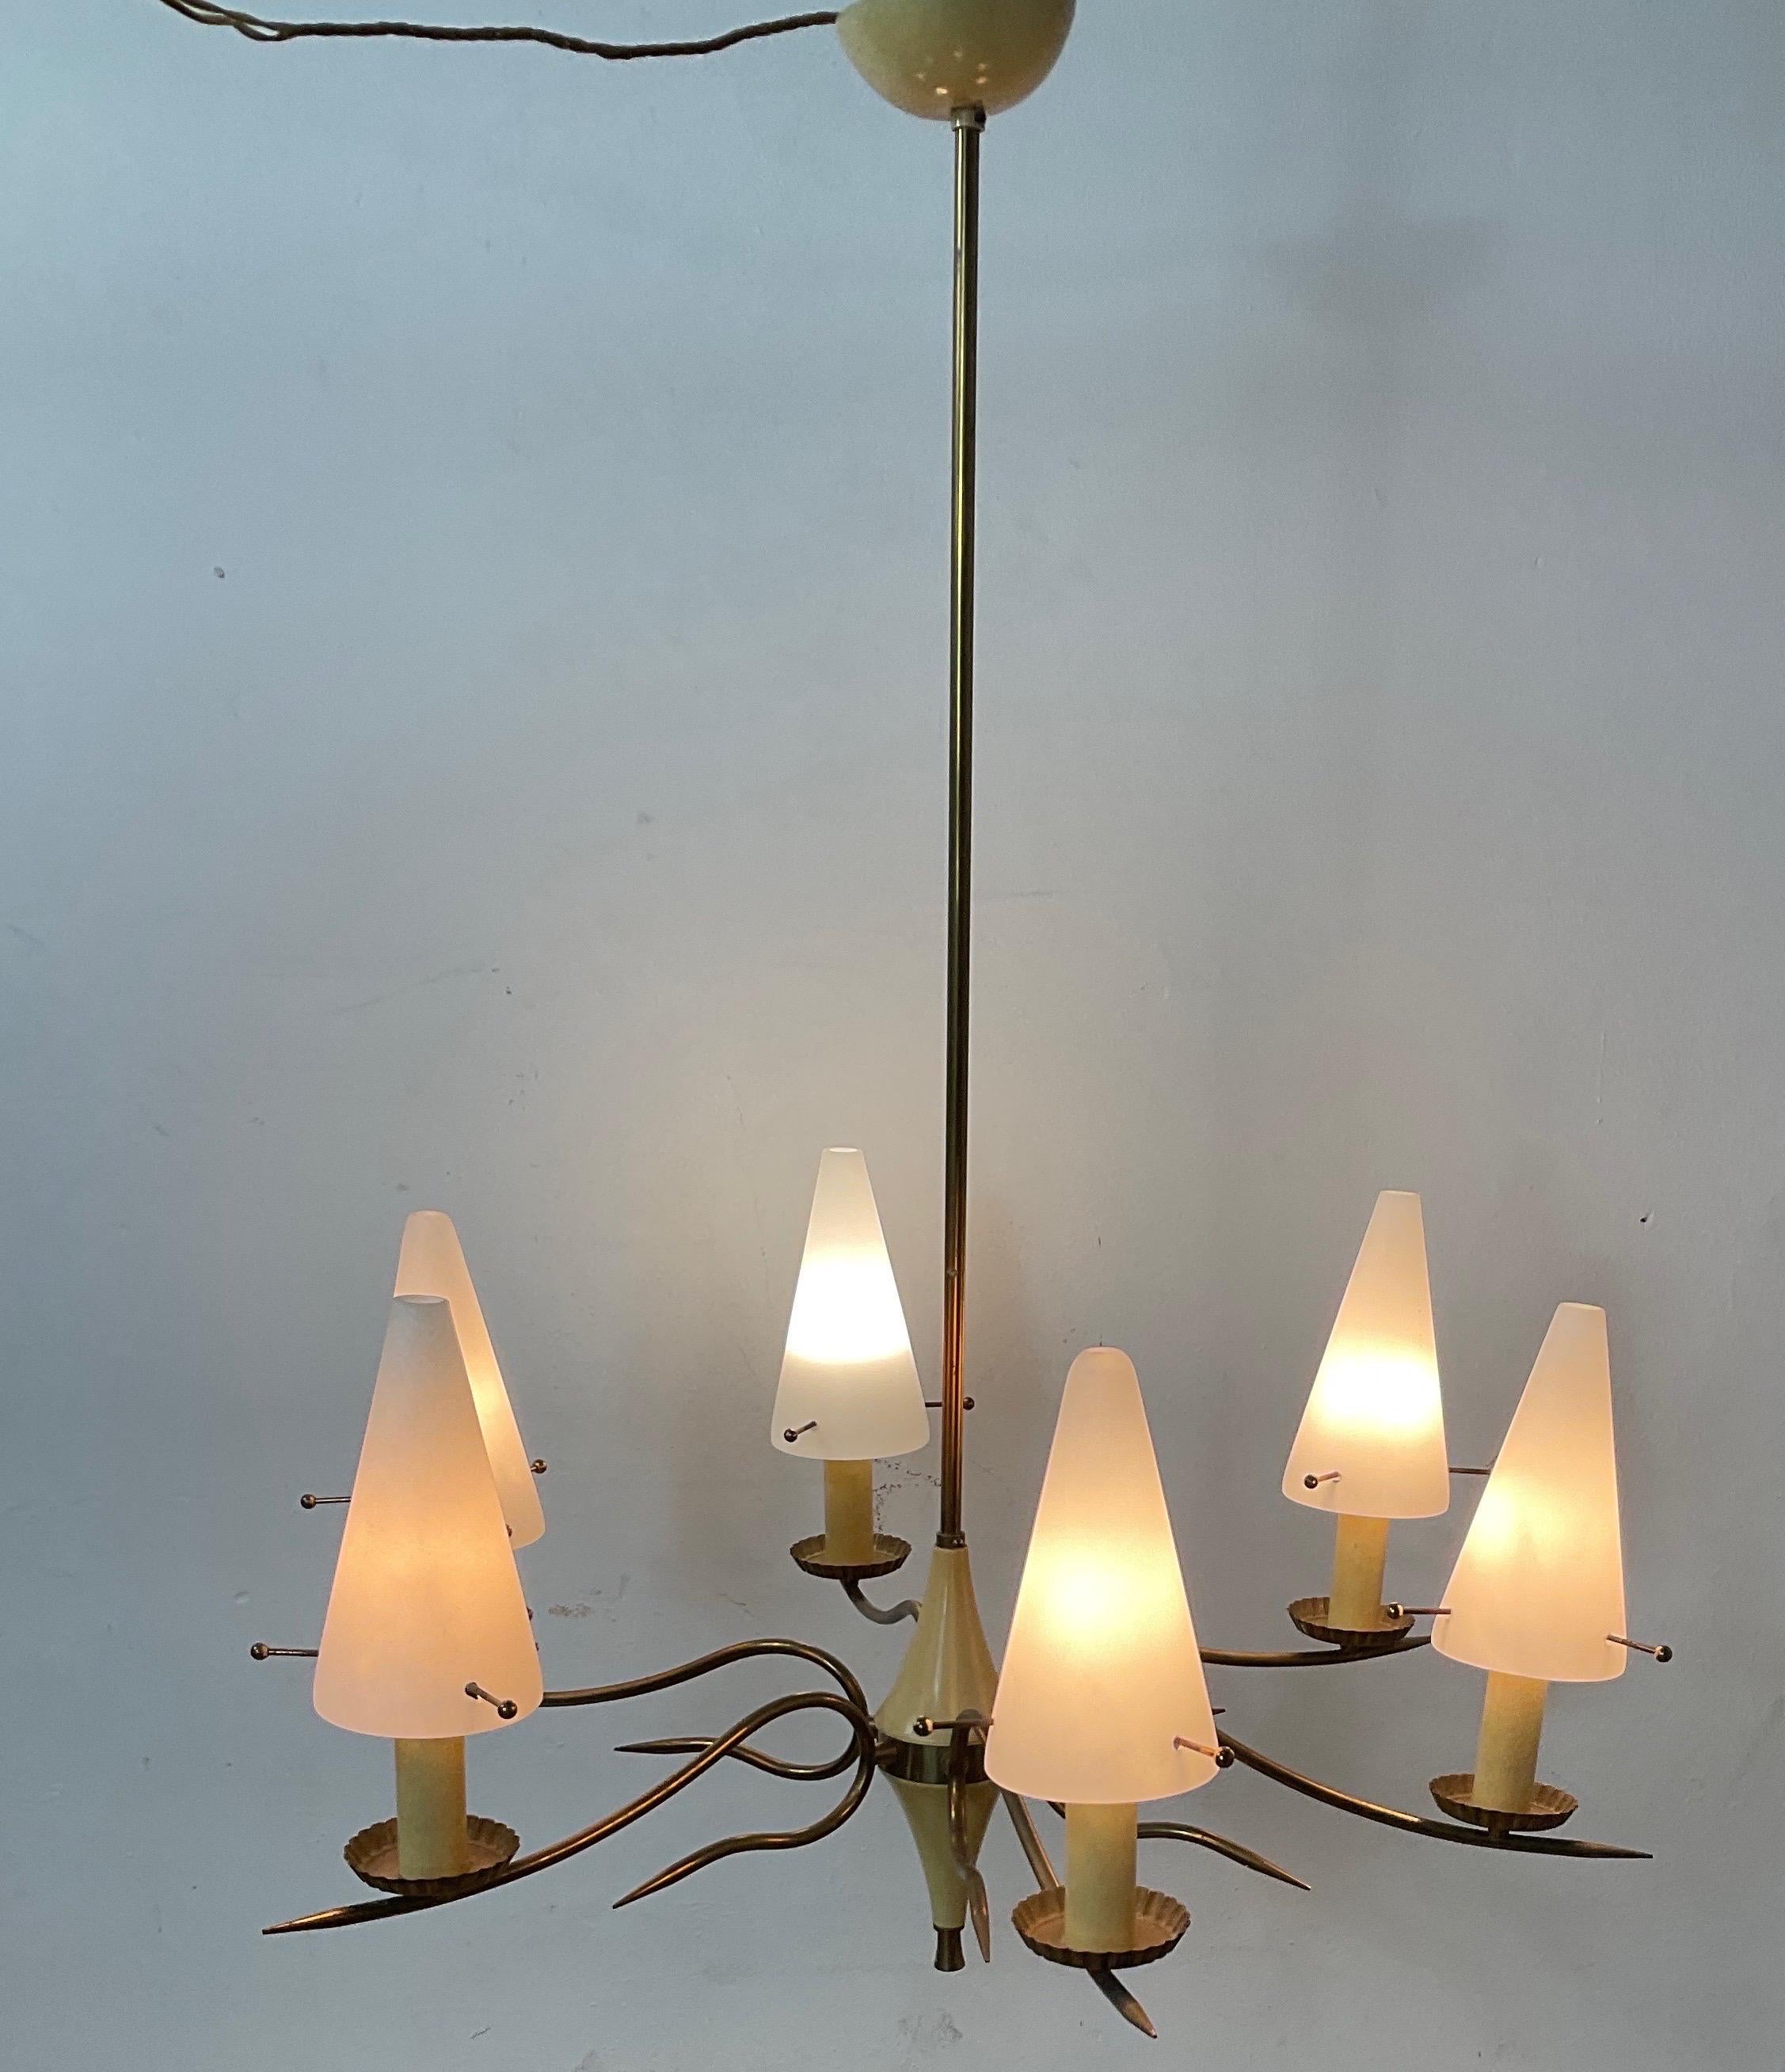 Chandelier in brass and painted aluminum in good condition attributable to the Italian manufacturer stilnovo of 50/60 of 900. Consisting of 6 lights covered with triangular glass bowls